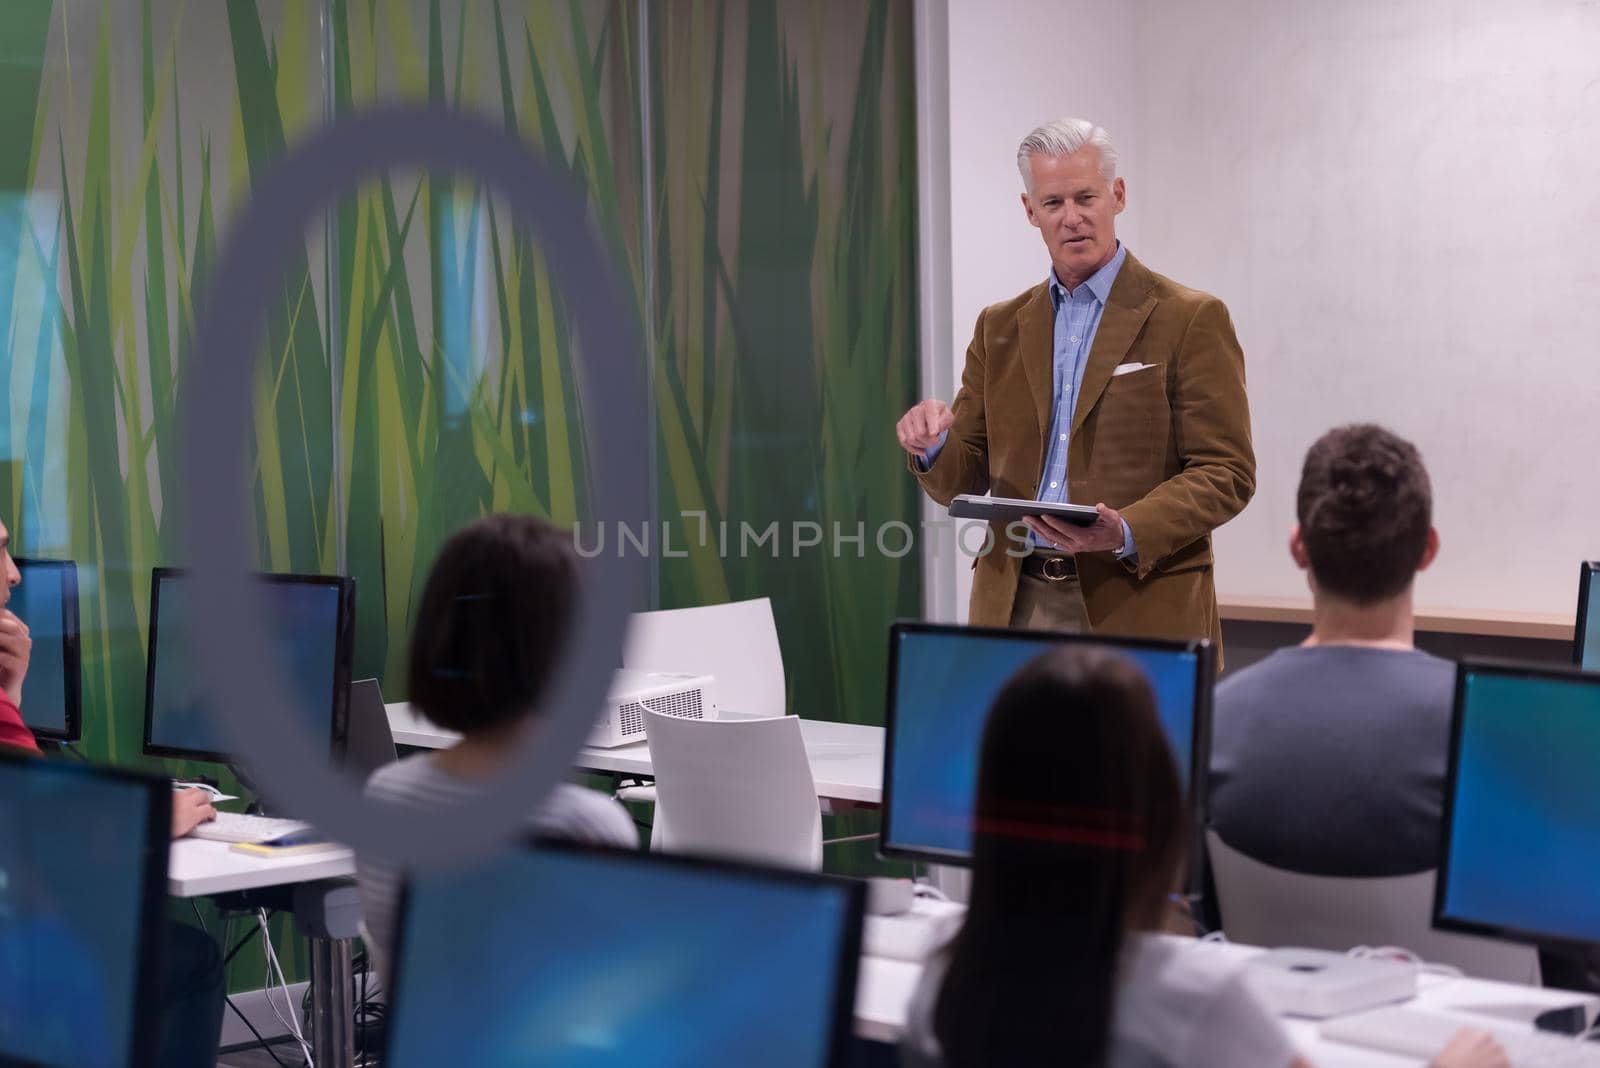 handsome mature teacher and students in computer lab classroom